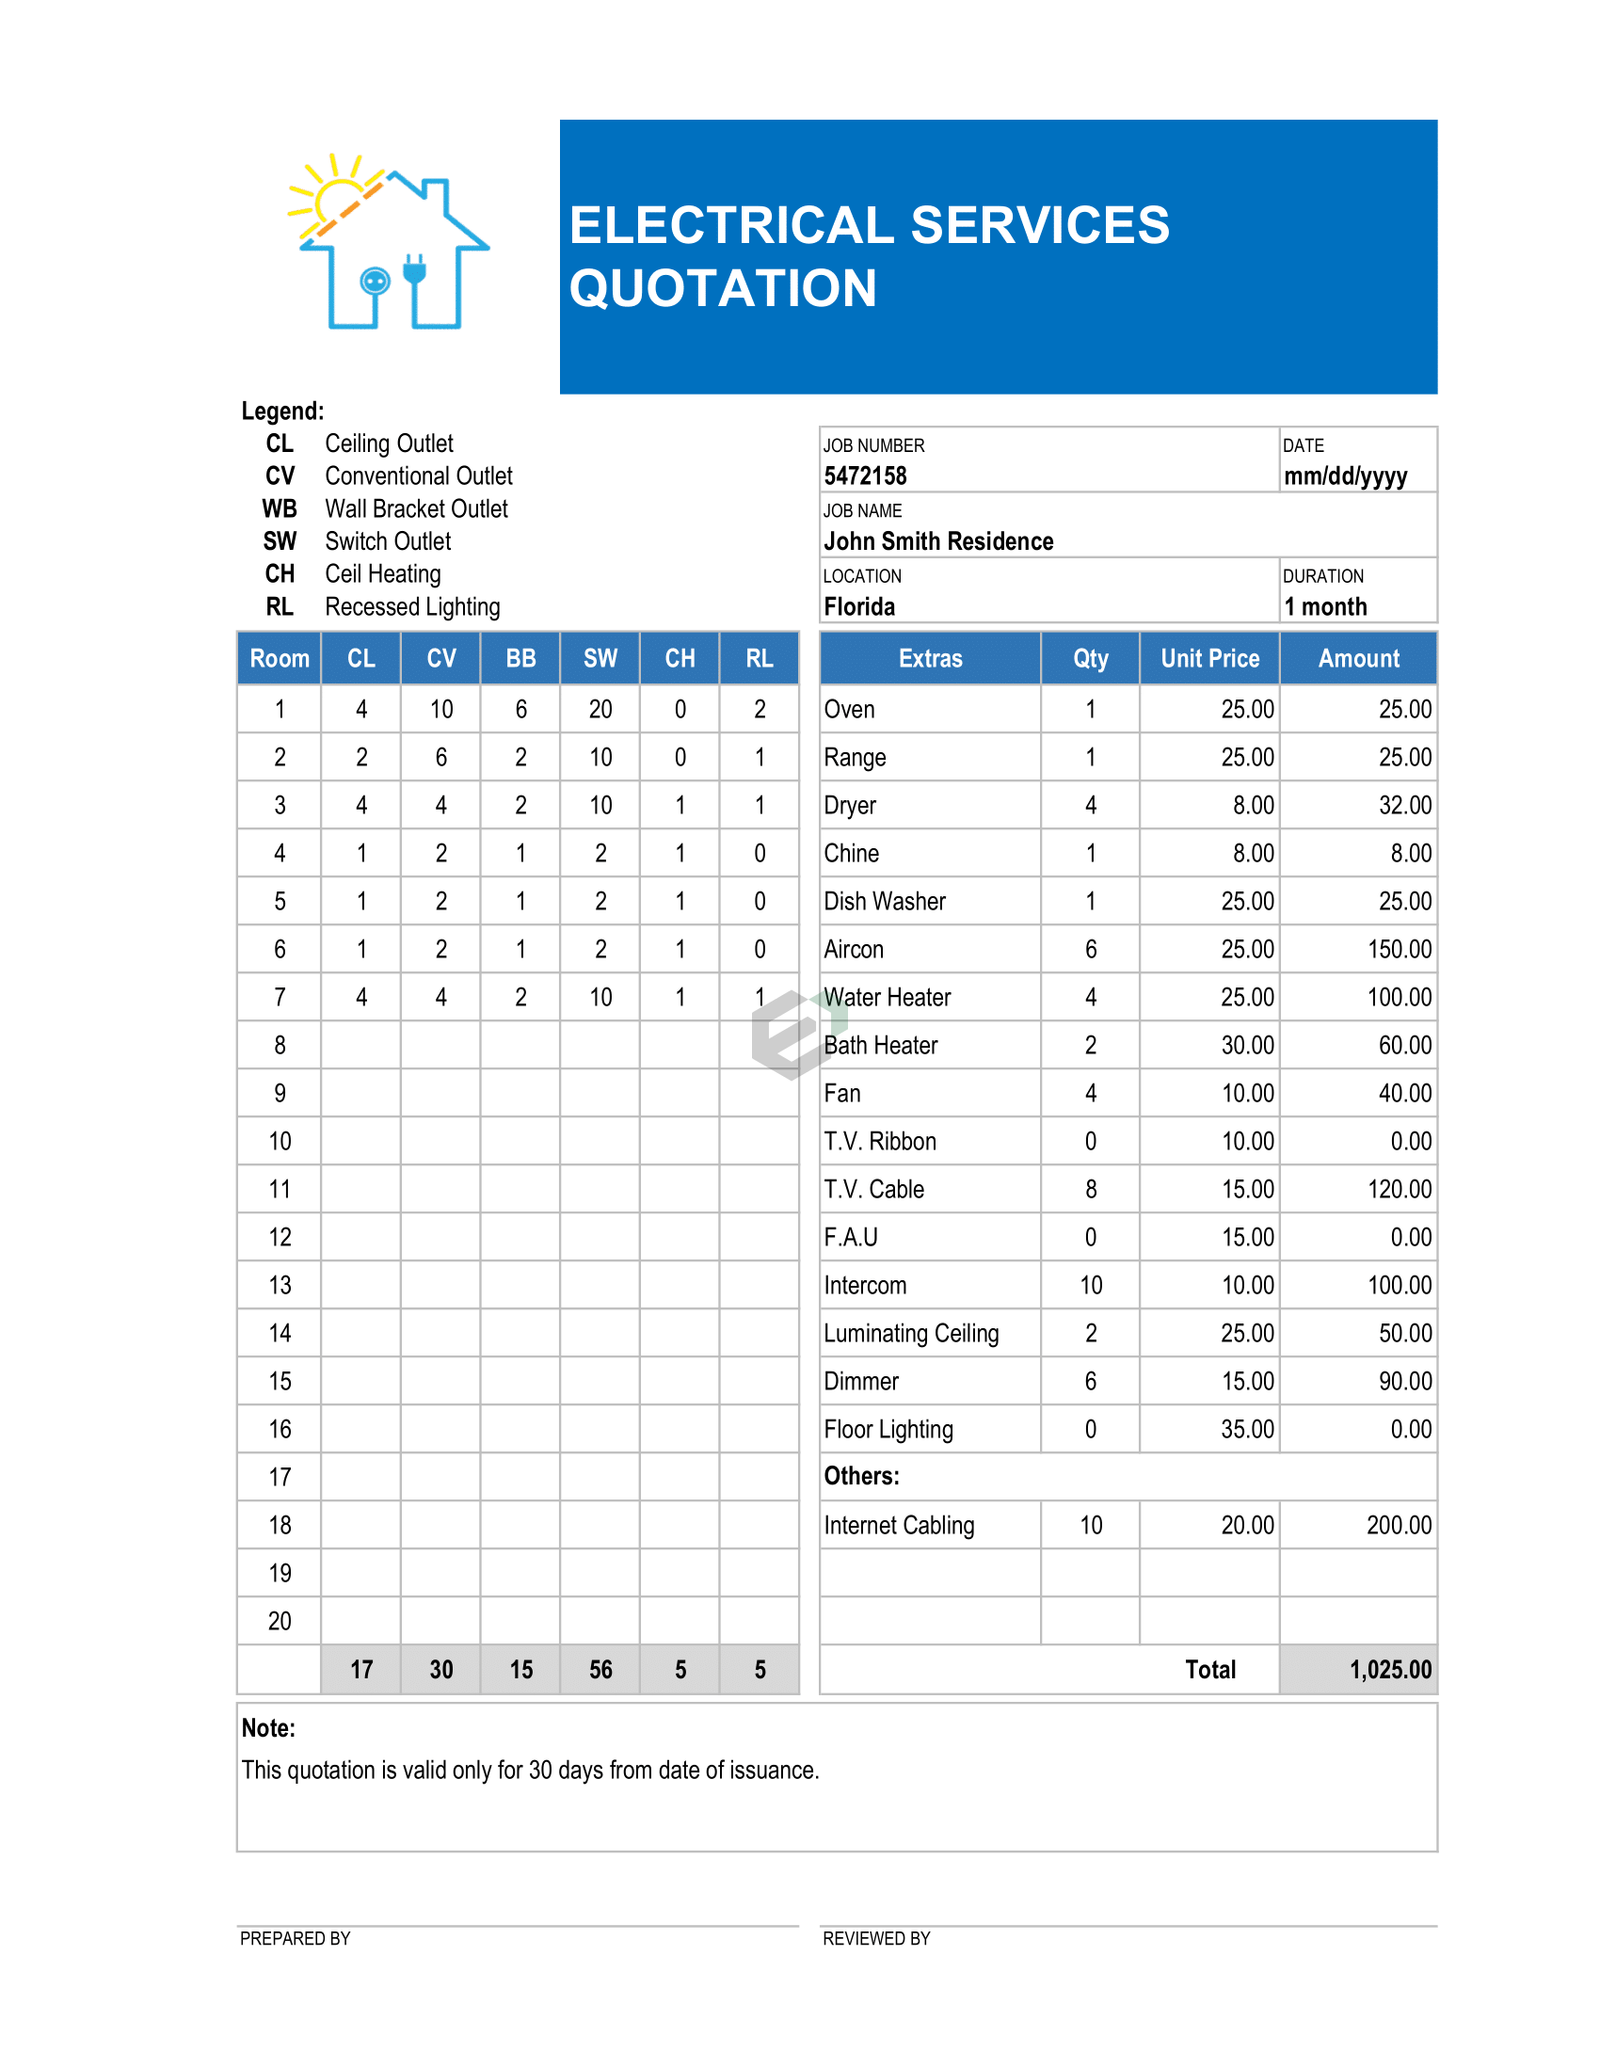 Electrical Services Quotation-Excel Template | Download for free